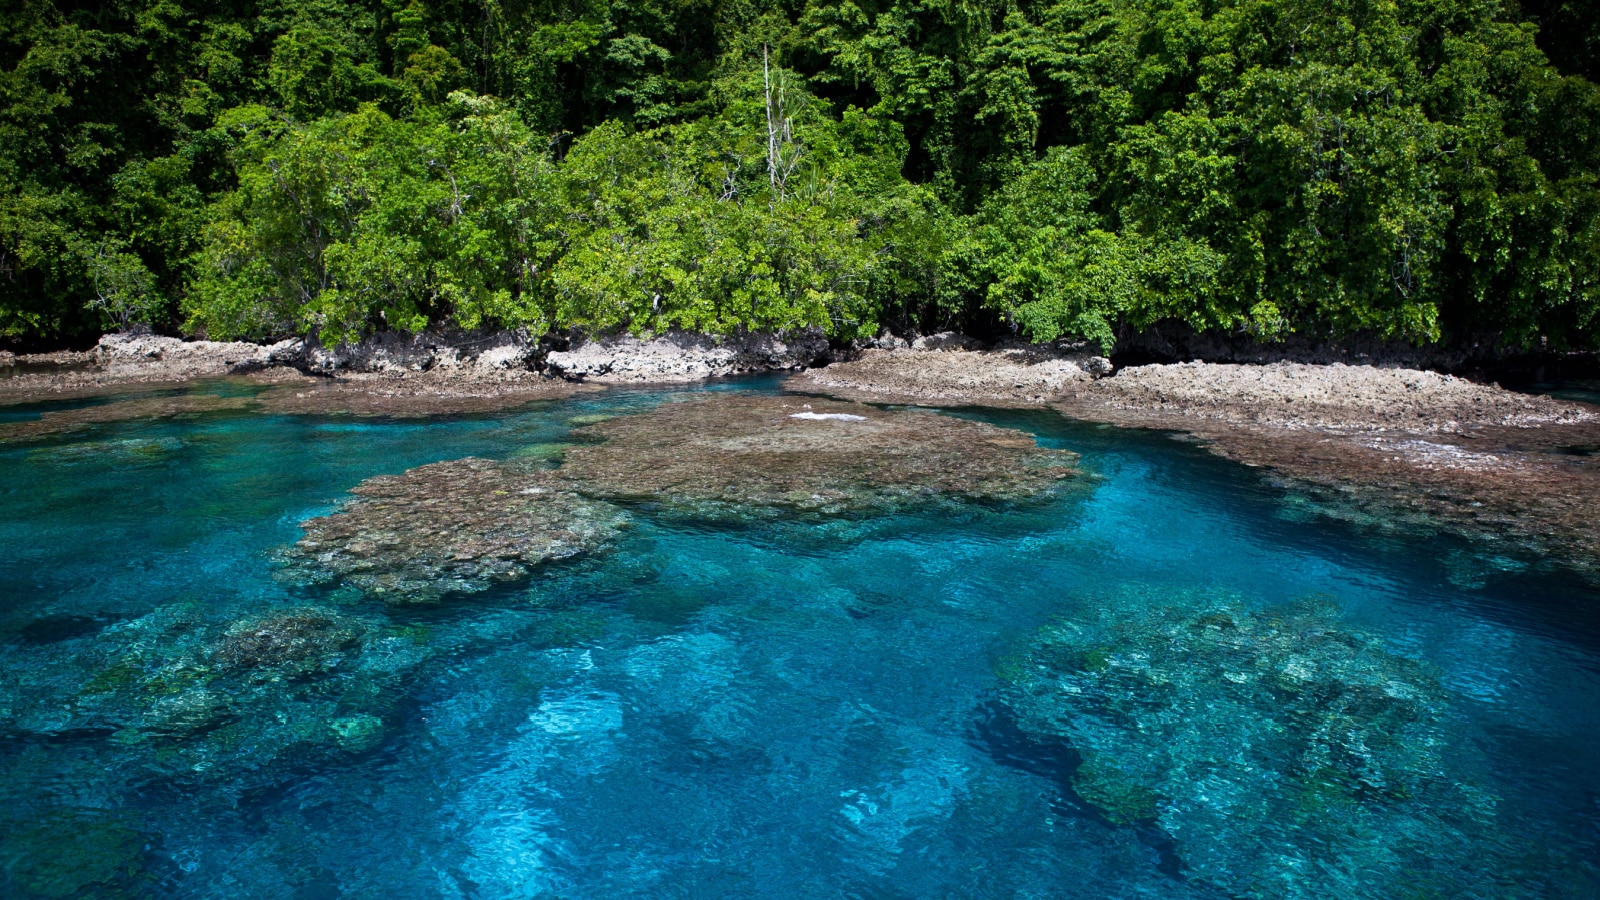 A fringing coral reef grows along the edge of a lush tropical island in the Solomon Islands. These diverse islands lie in the easternmost corner of the Coral Triangle.